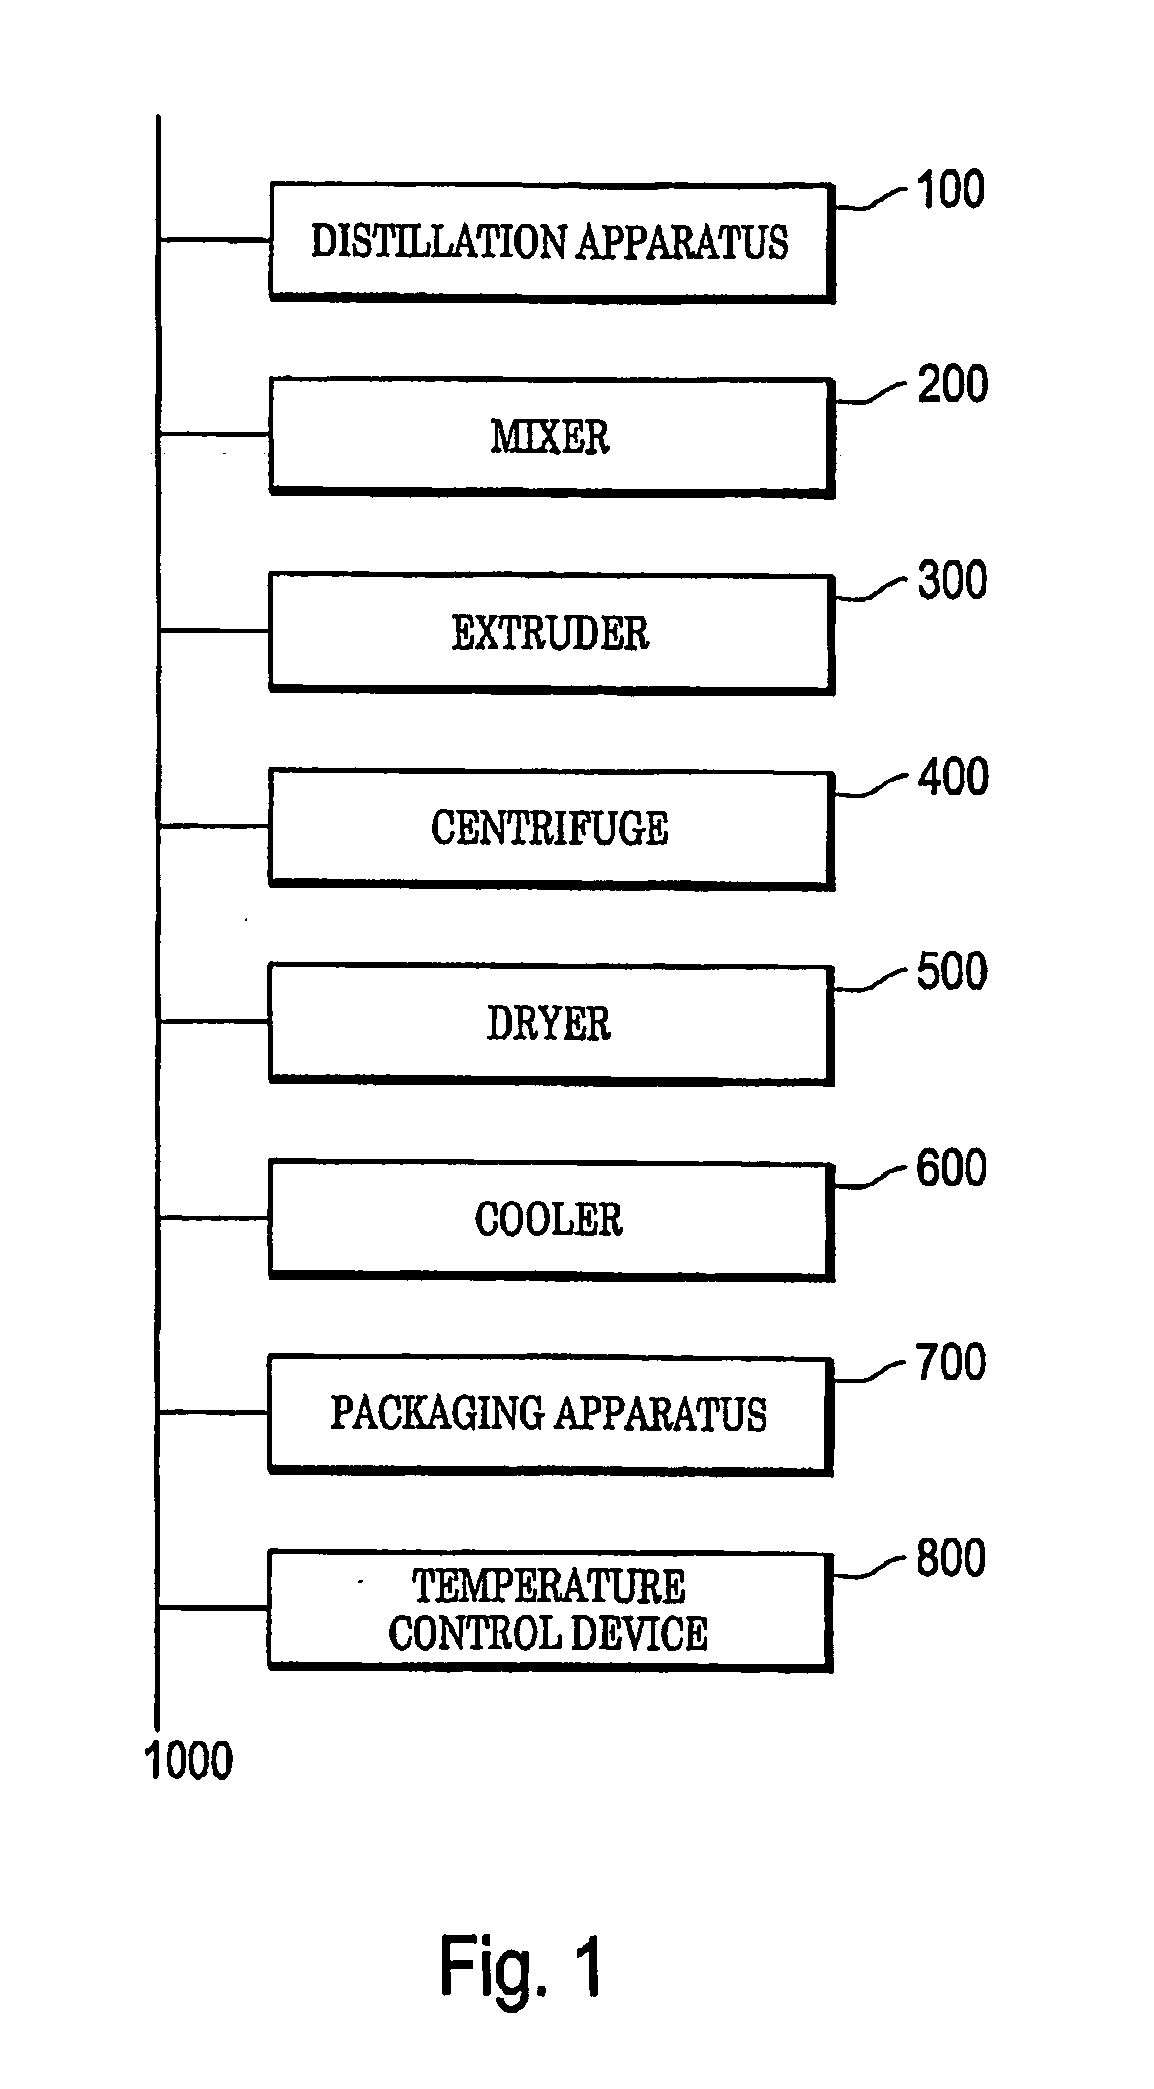 Fermentation byproduct feed formulation and processing